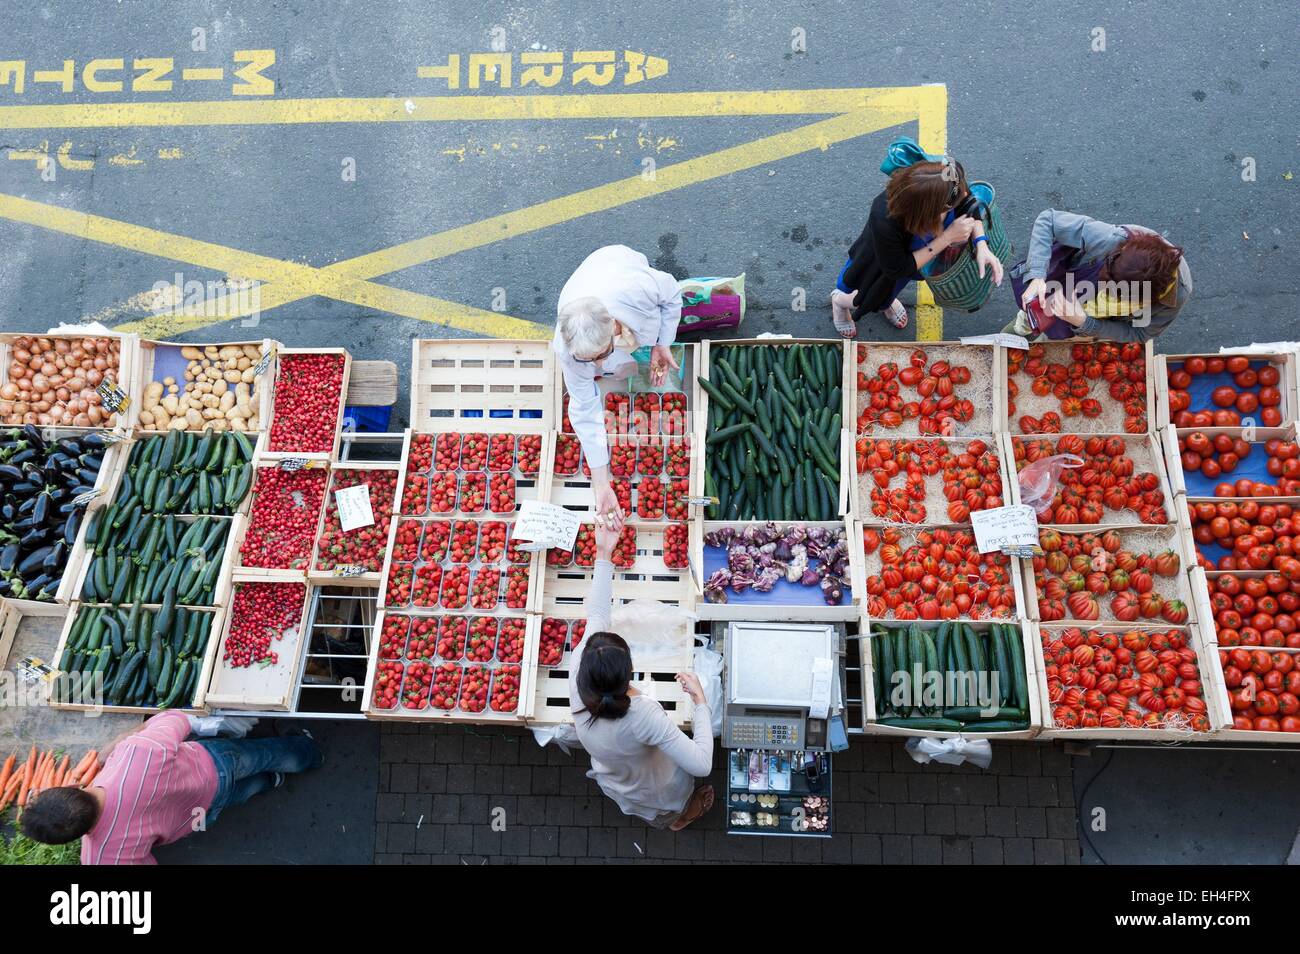 France, Gironde, Libourne, market, diving for a market tomatoes Stock Photo